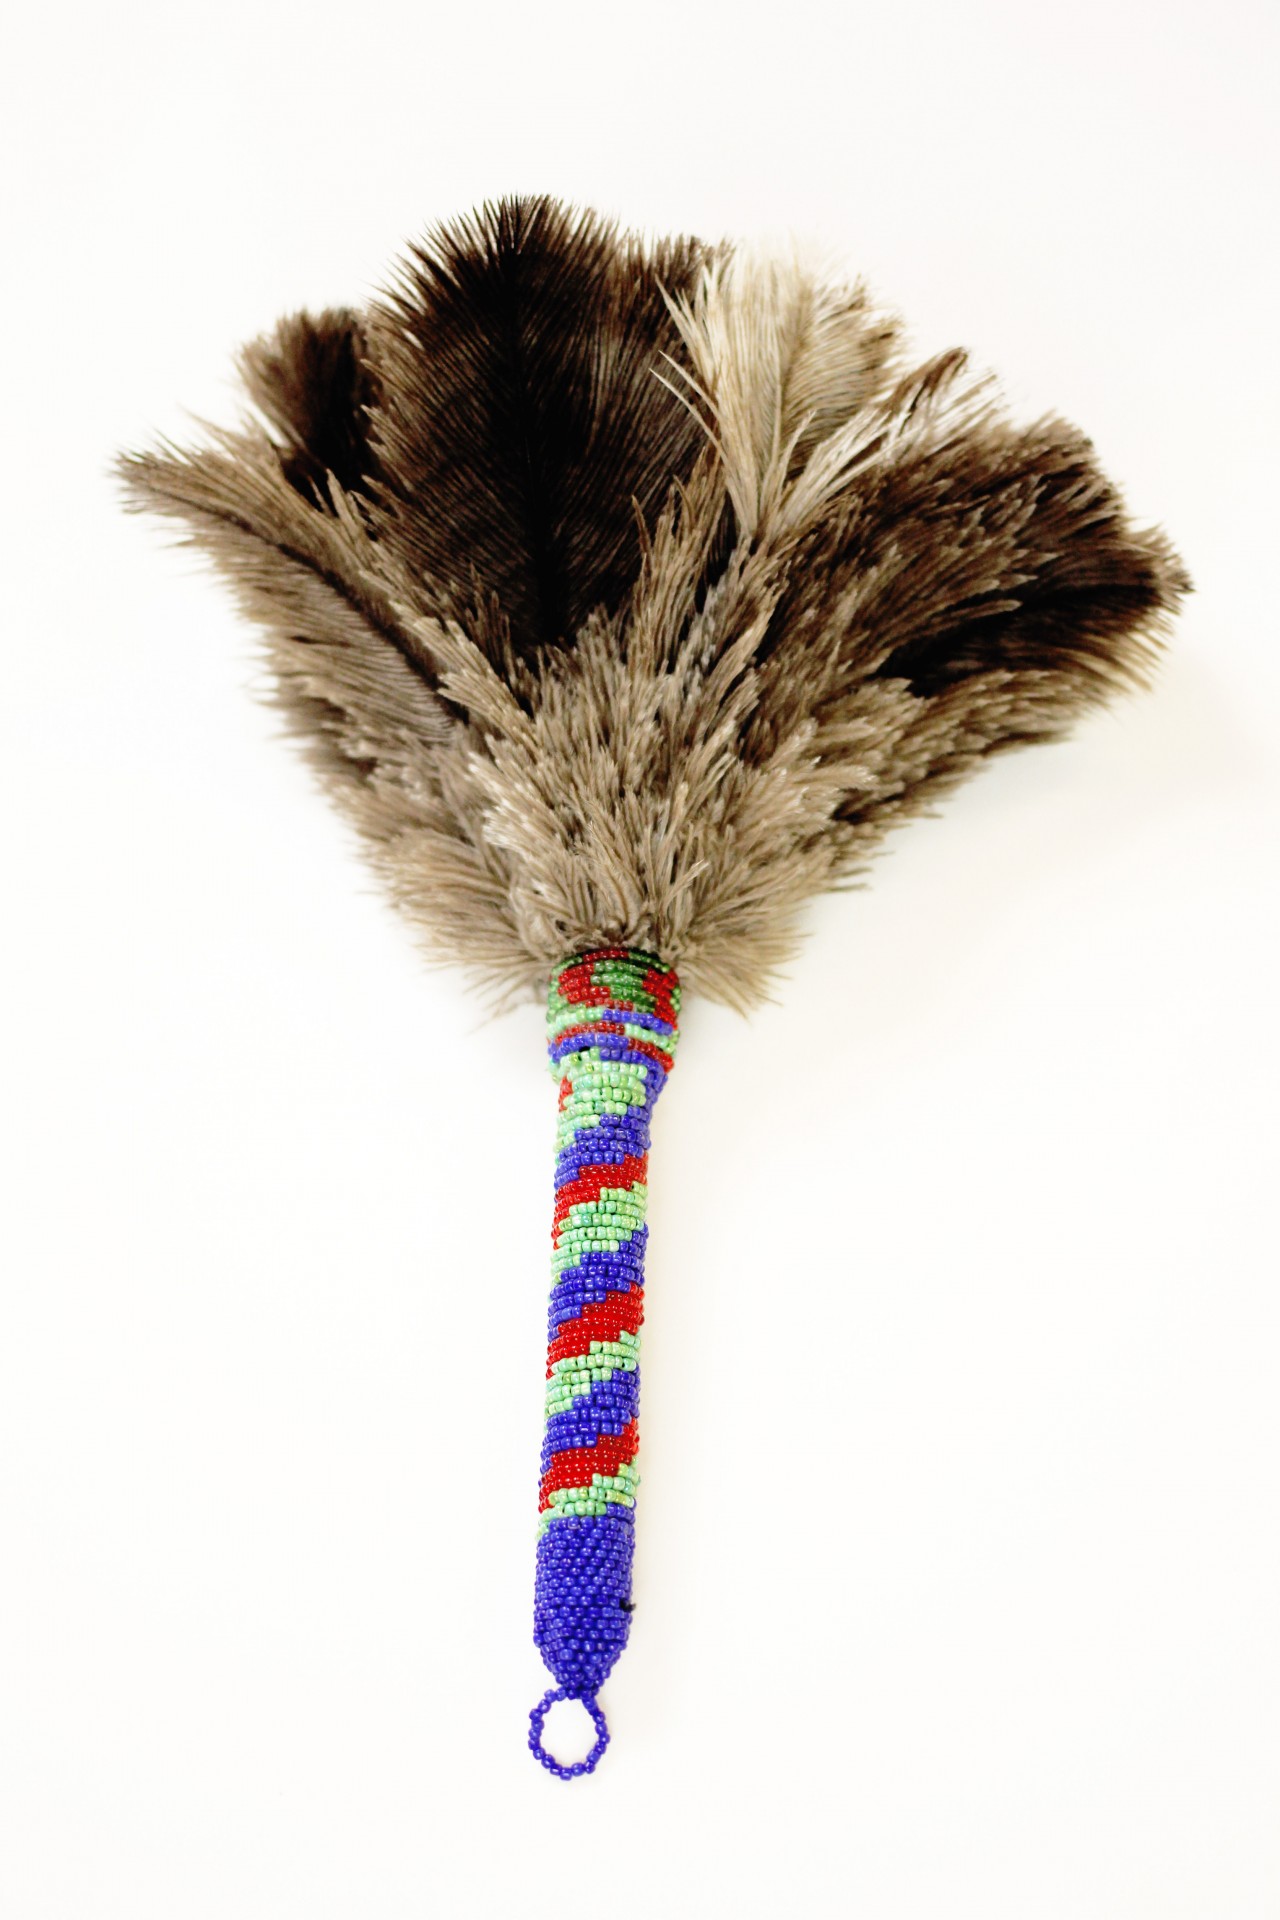 ostrich feather duster feather duster free photo